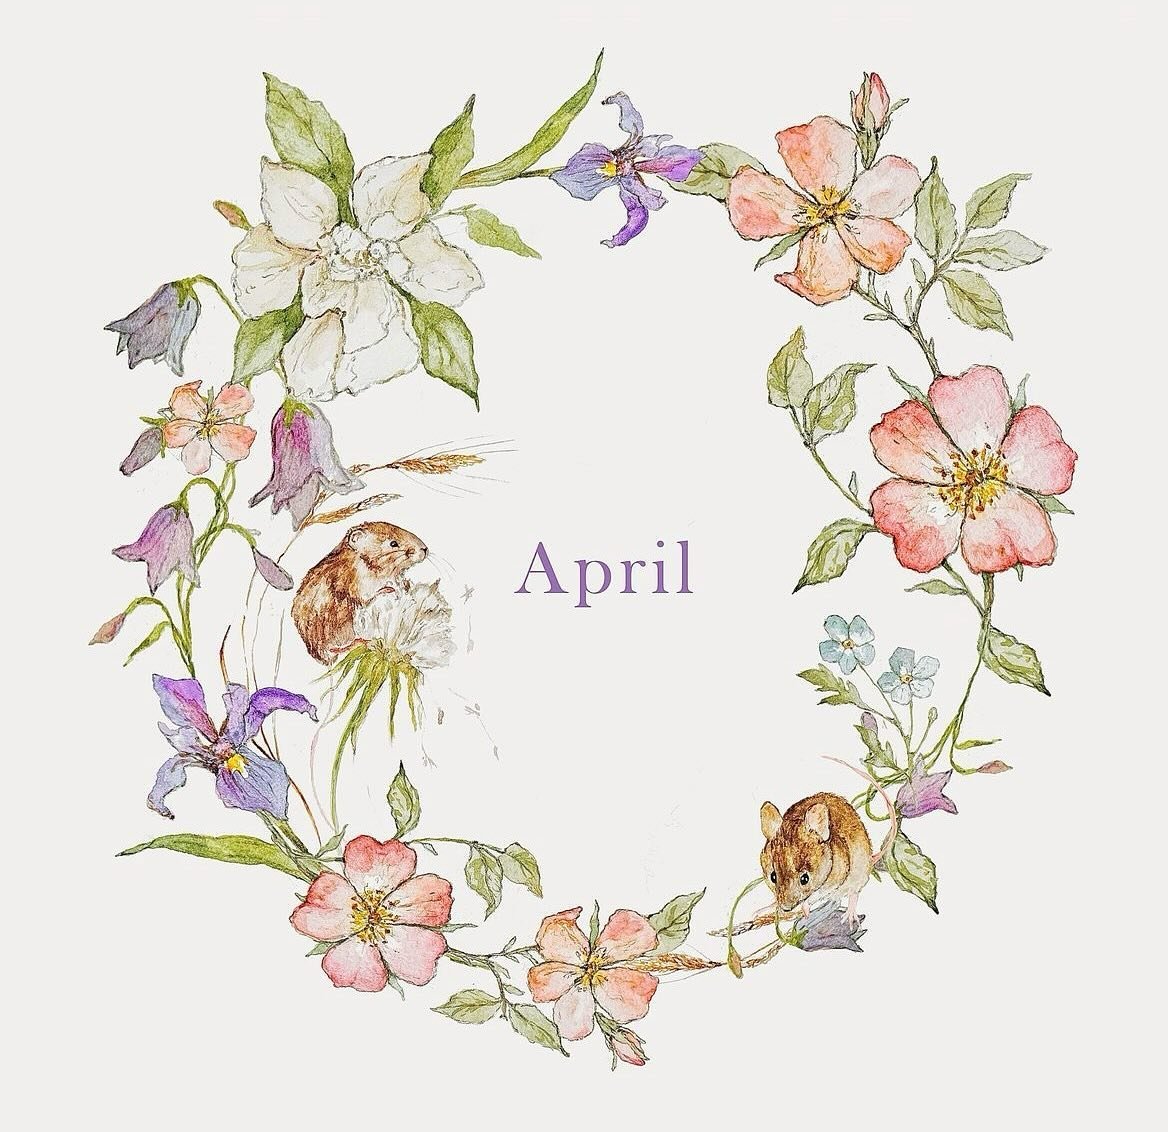 Welcome April 🌷 

A time of blooms &amp; bitter greens. 
When our energy begins to quicken and our bodies ask for movement.

A time to begin spinning and weaving together your visions and intentions from the winter dreaming season.

writing prompt&m